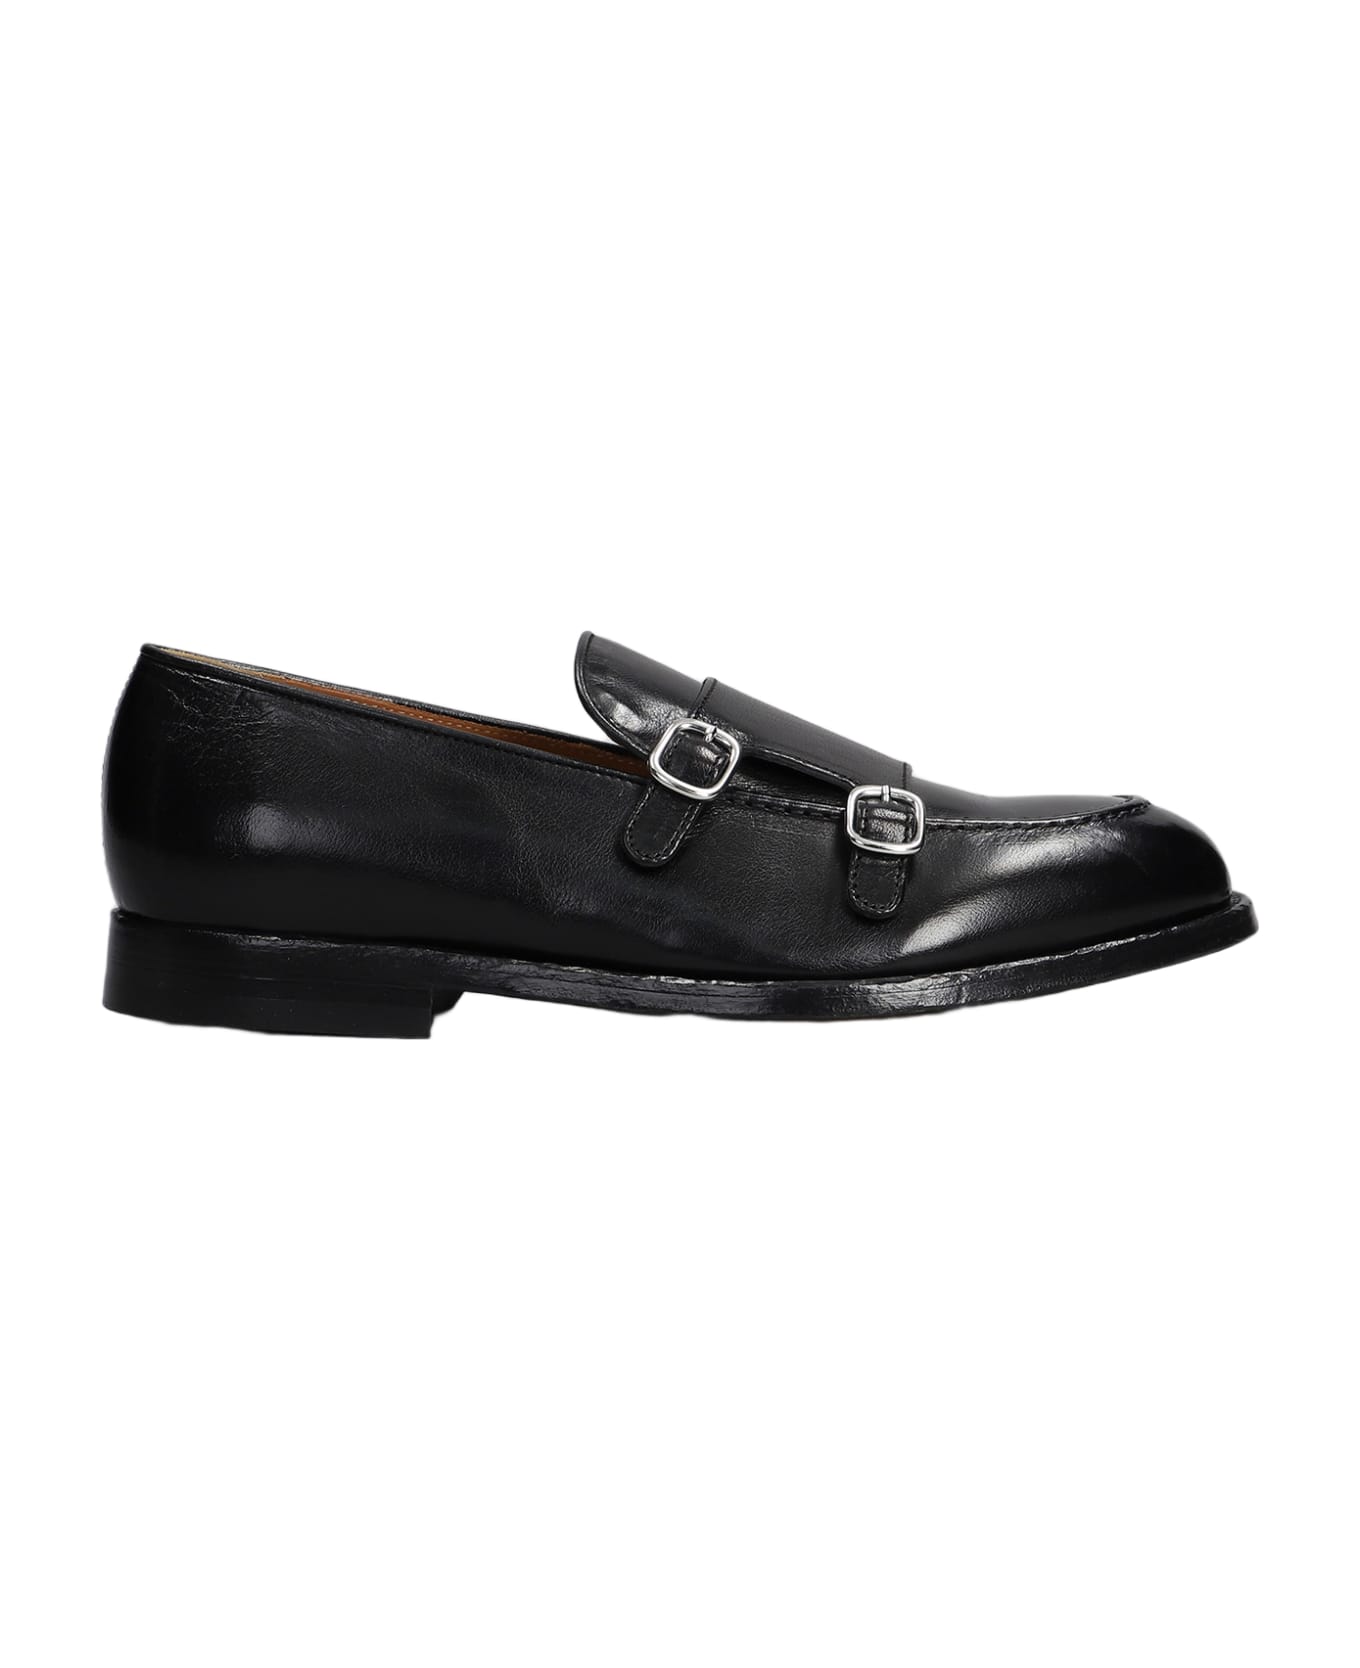 Green George Loafers In Black Leather - black